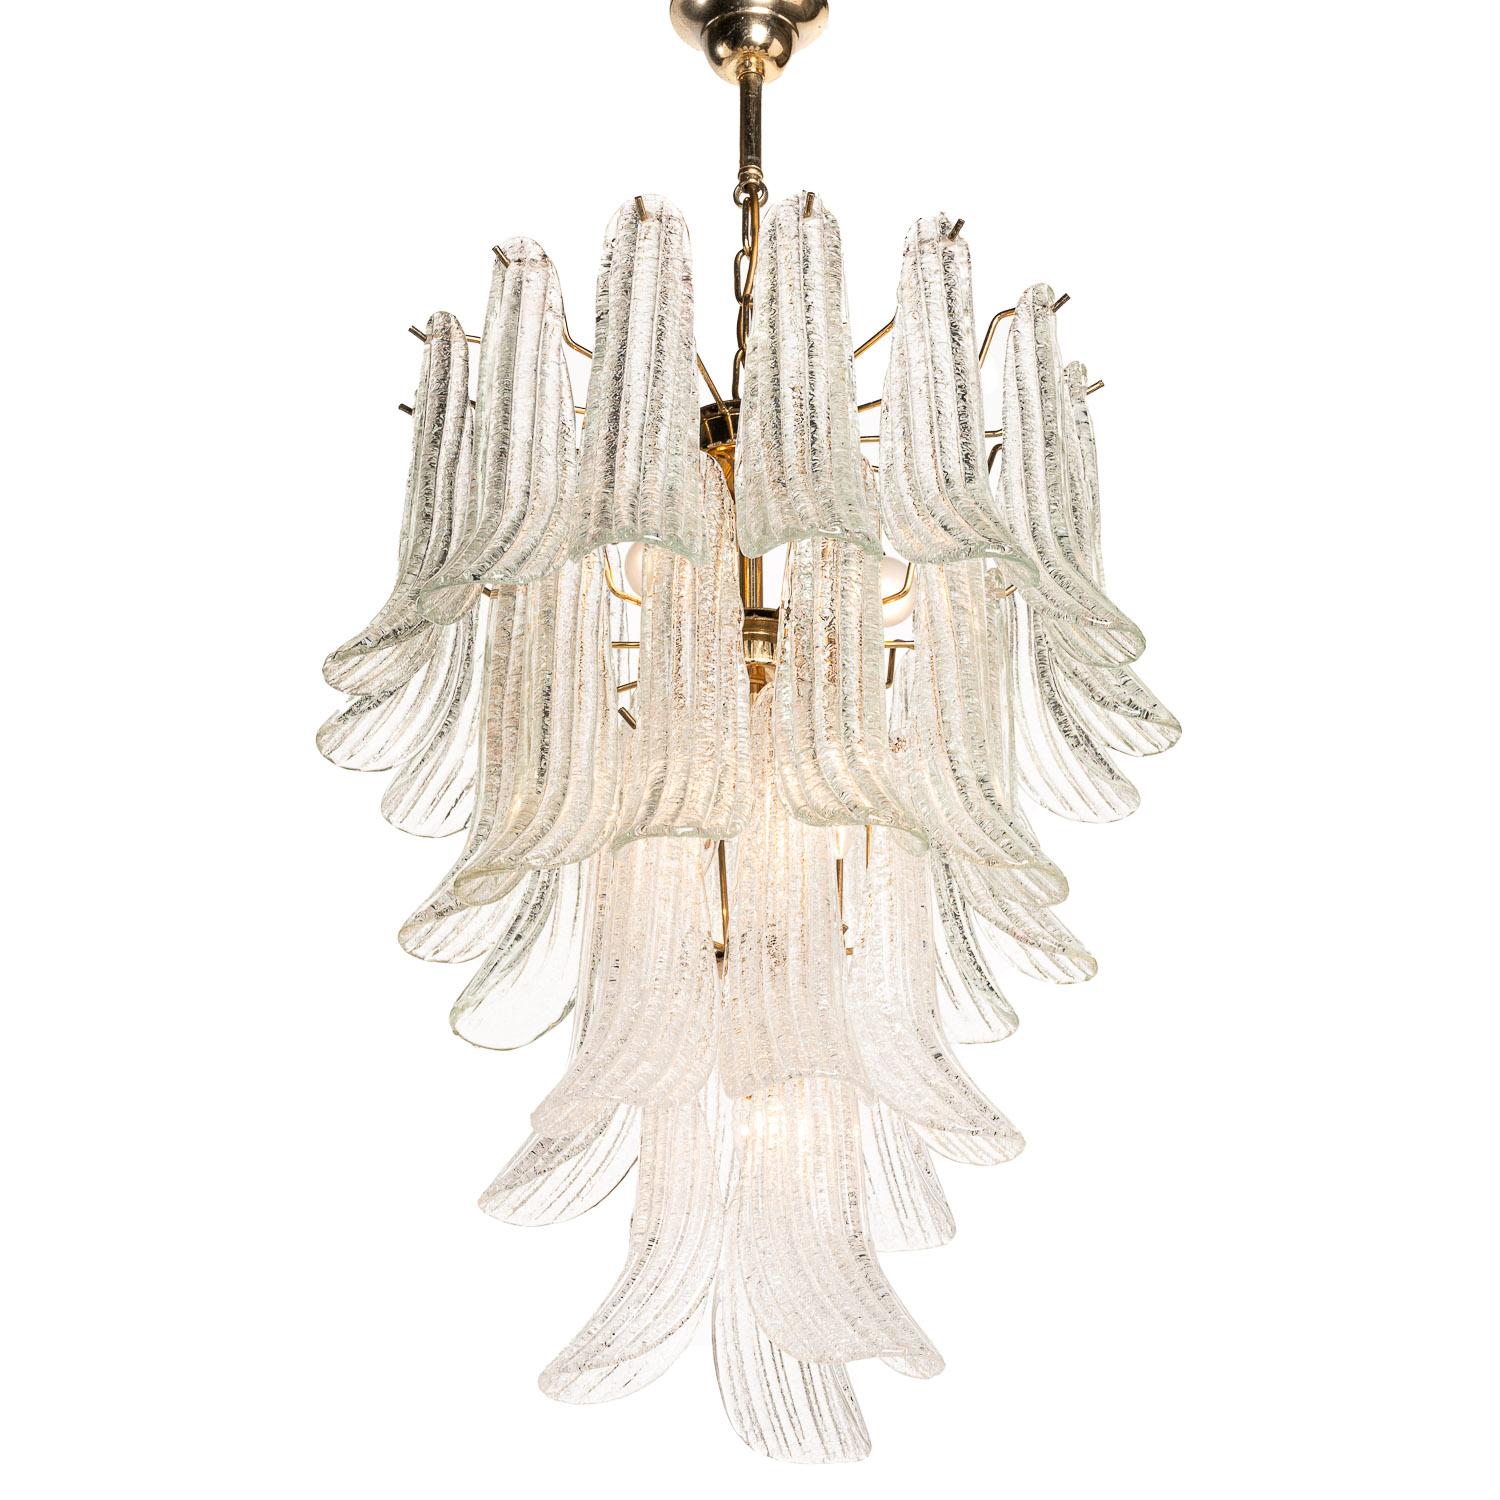 Italian 1950's Glass and Brass Chandelier Attributed to Barovier and Toso For Sale